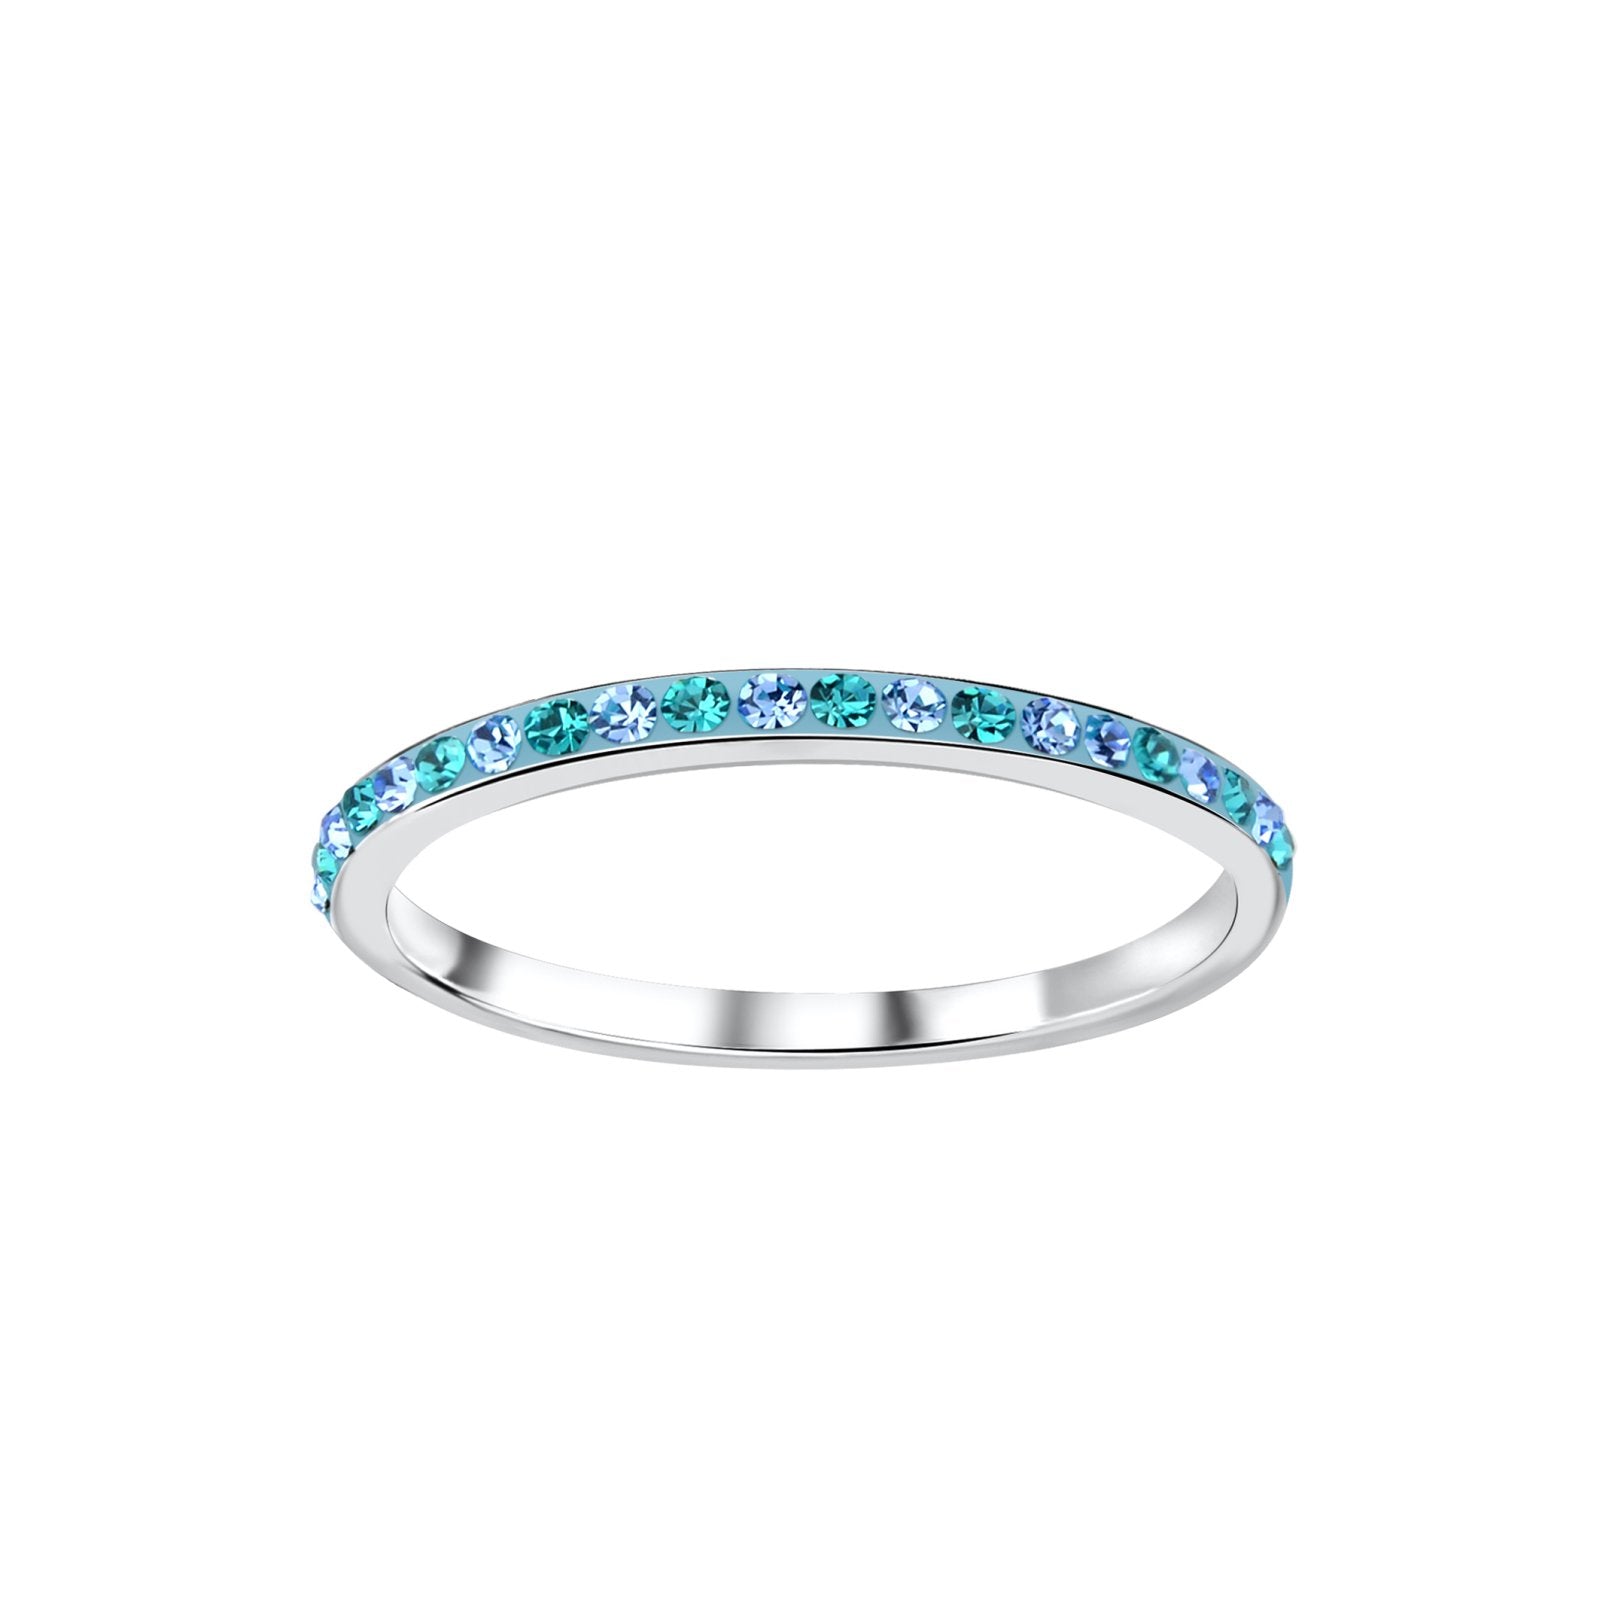 Eternity Silver Ring setting with white and blue Crystal